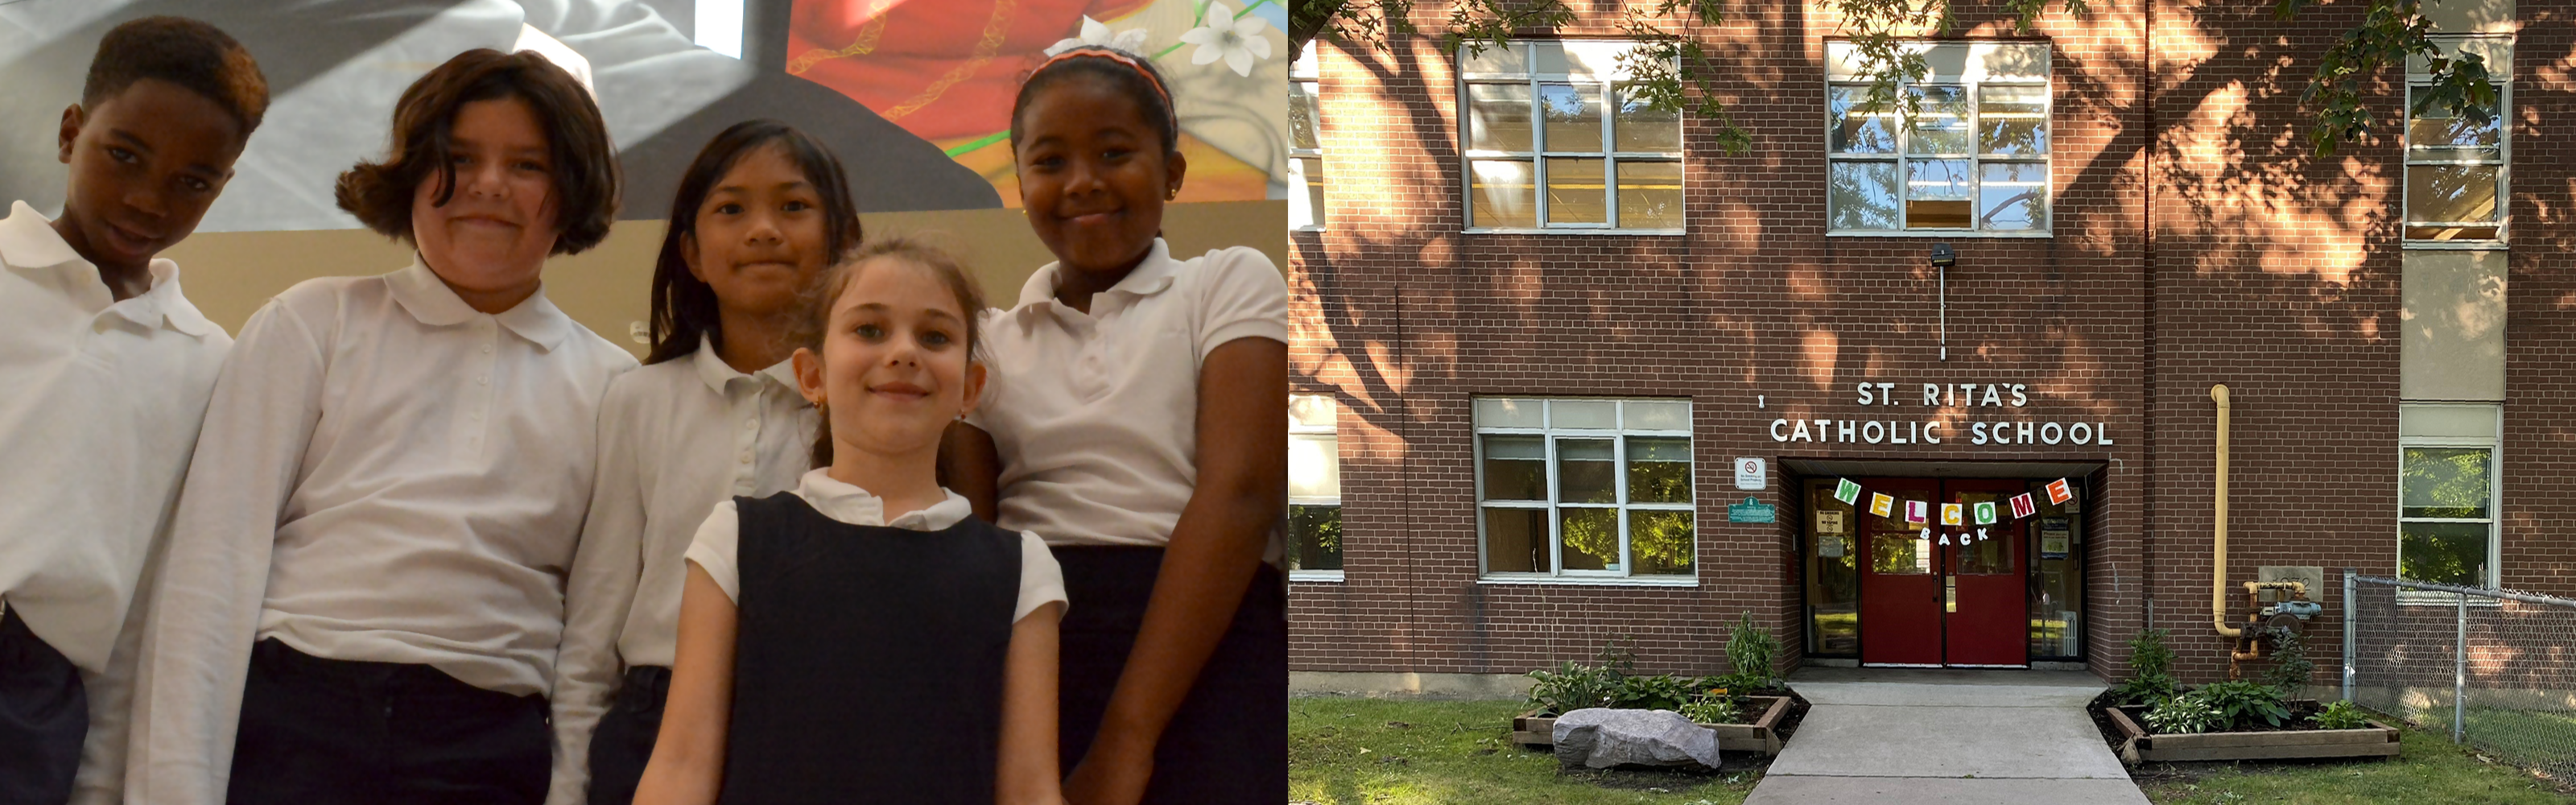 Left, a group of elementary students in white and navy school uniform. Right, the front of the St. Rita Catholic School building.